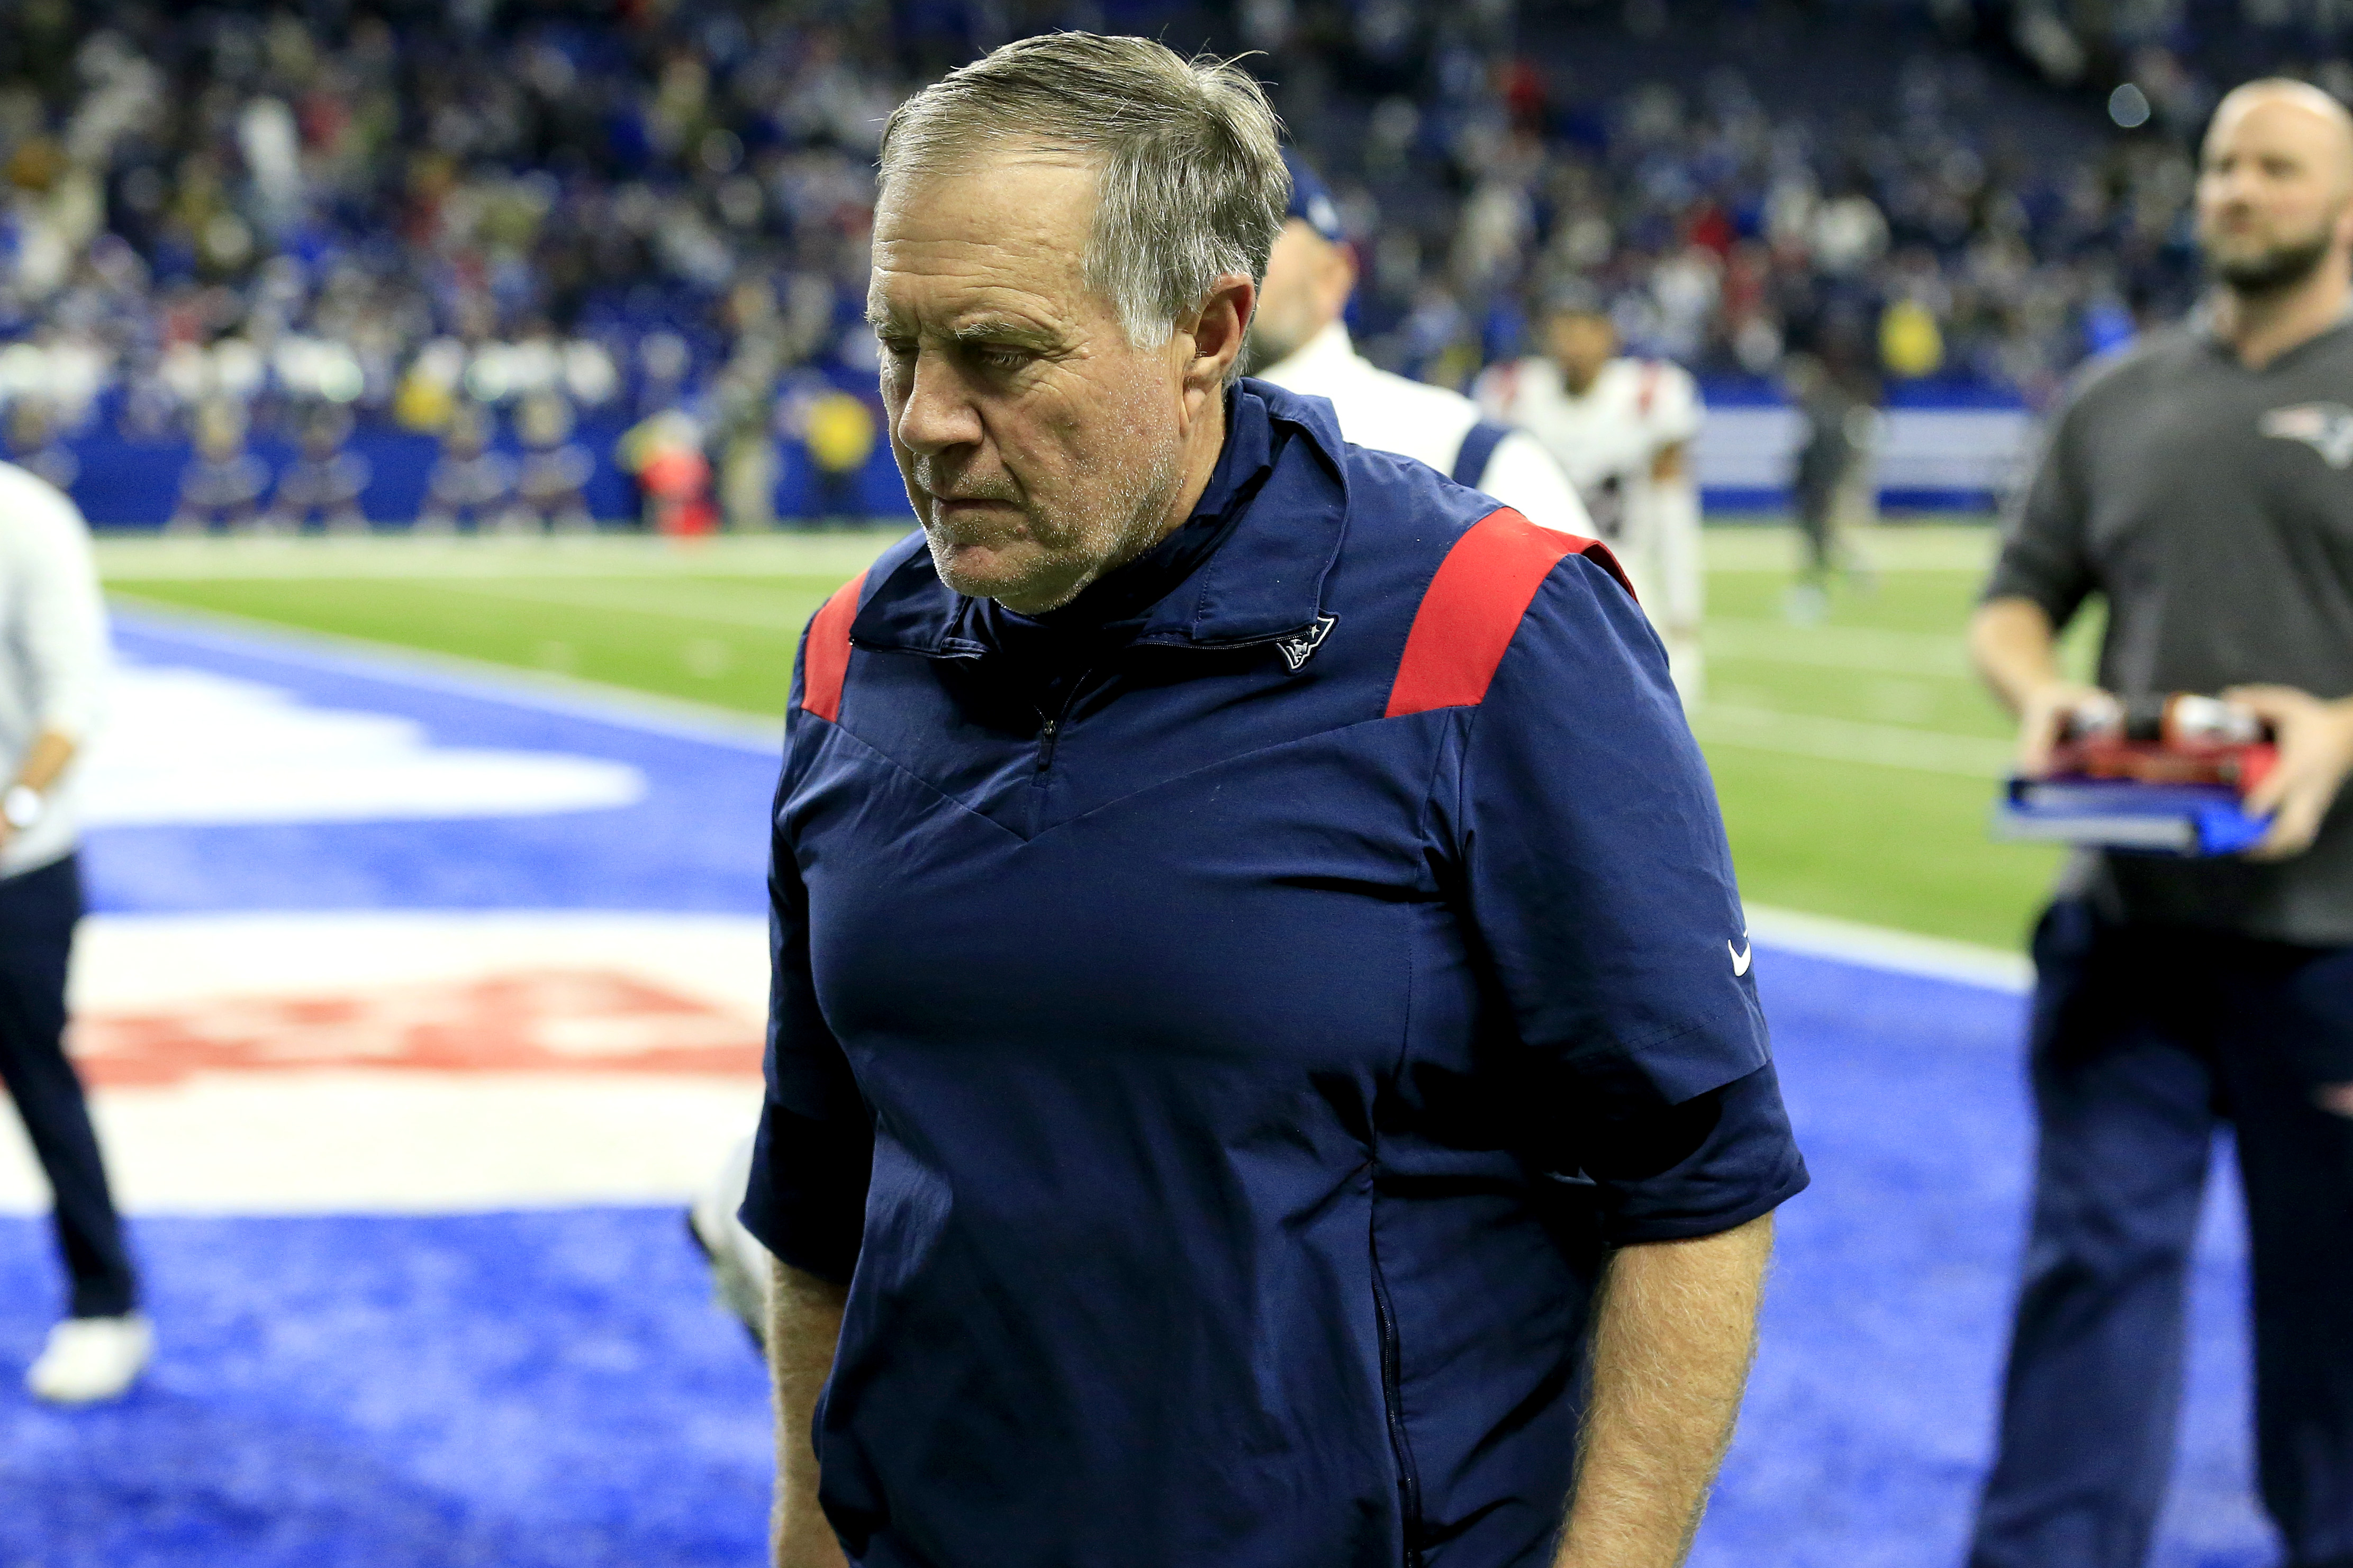 Bill Belichick walks off the field after his Patriots lost to the Colts Saturday